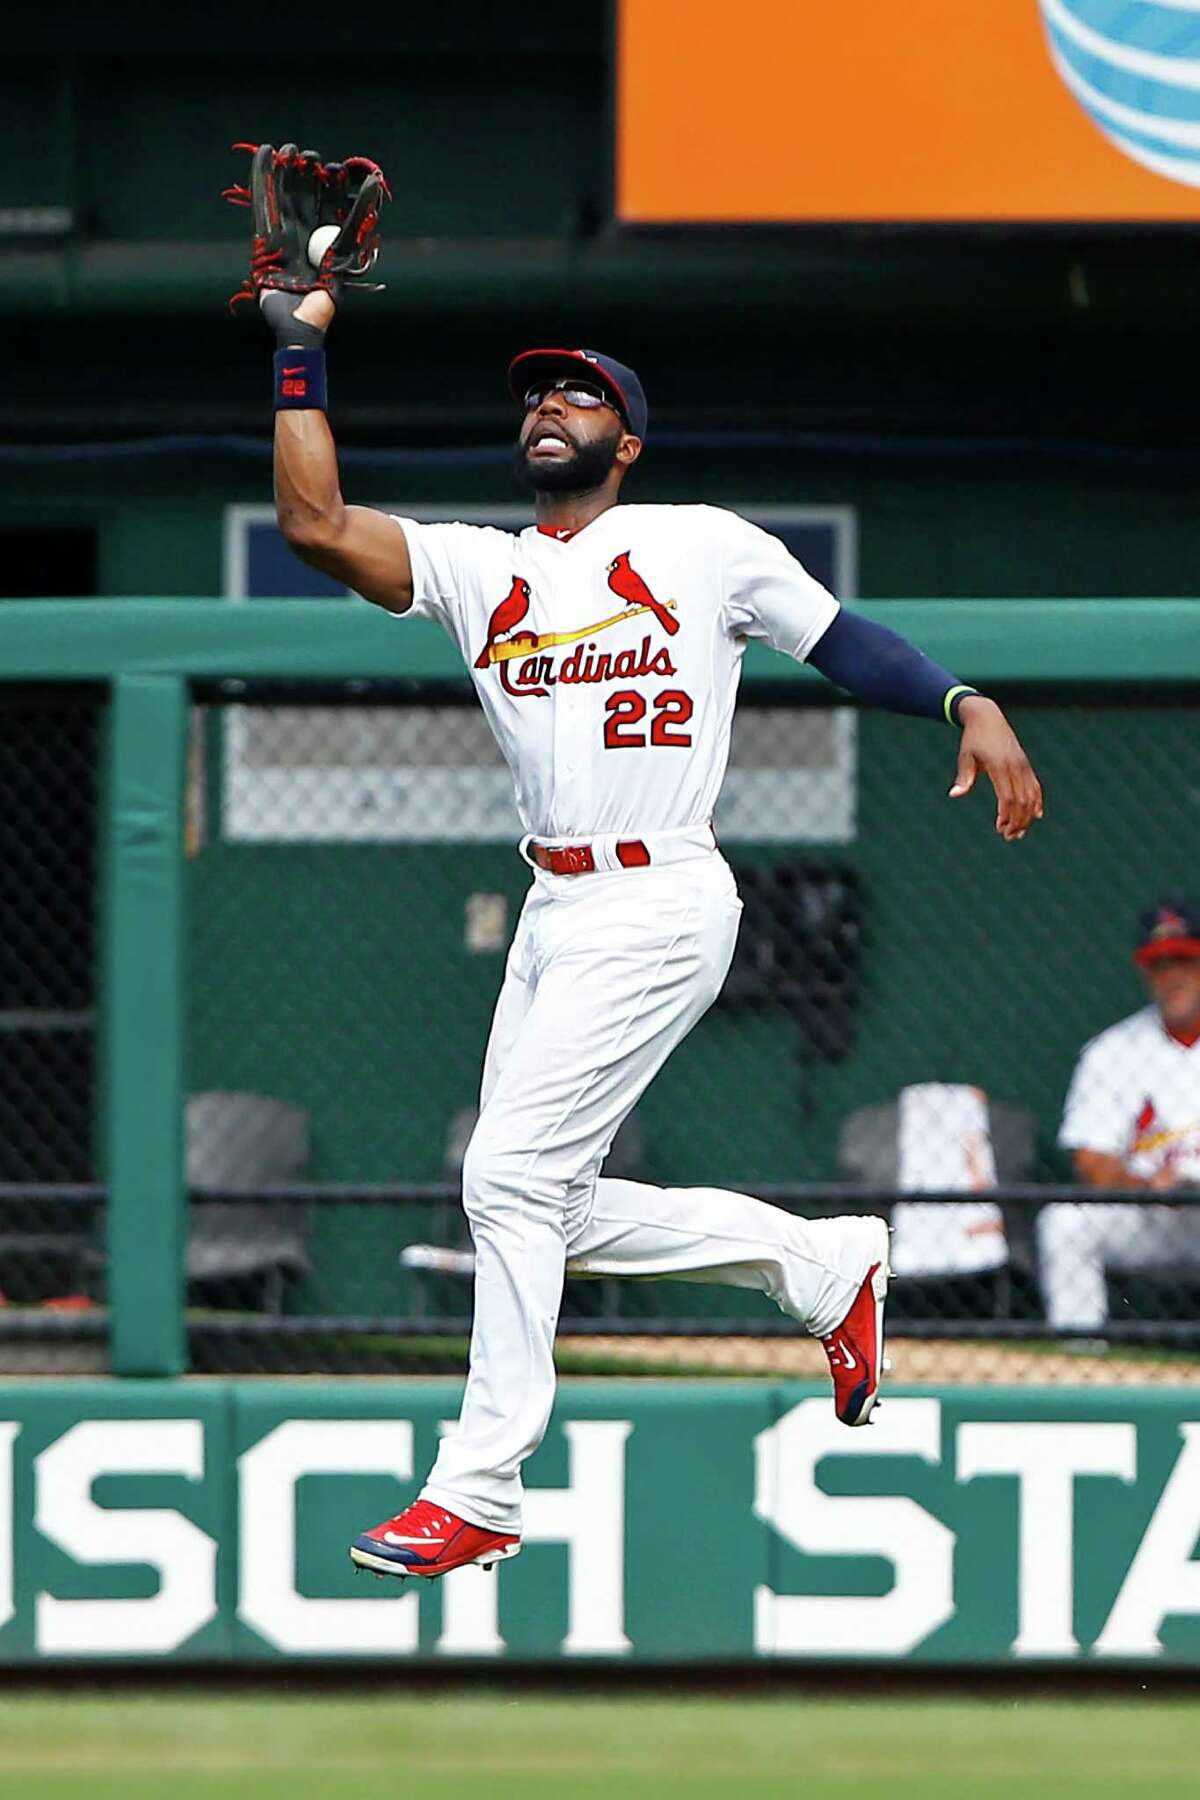 Cubs release Jason Heyward with one year left on $184 million deal